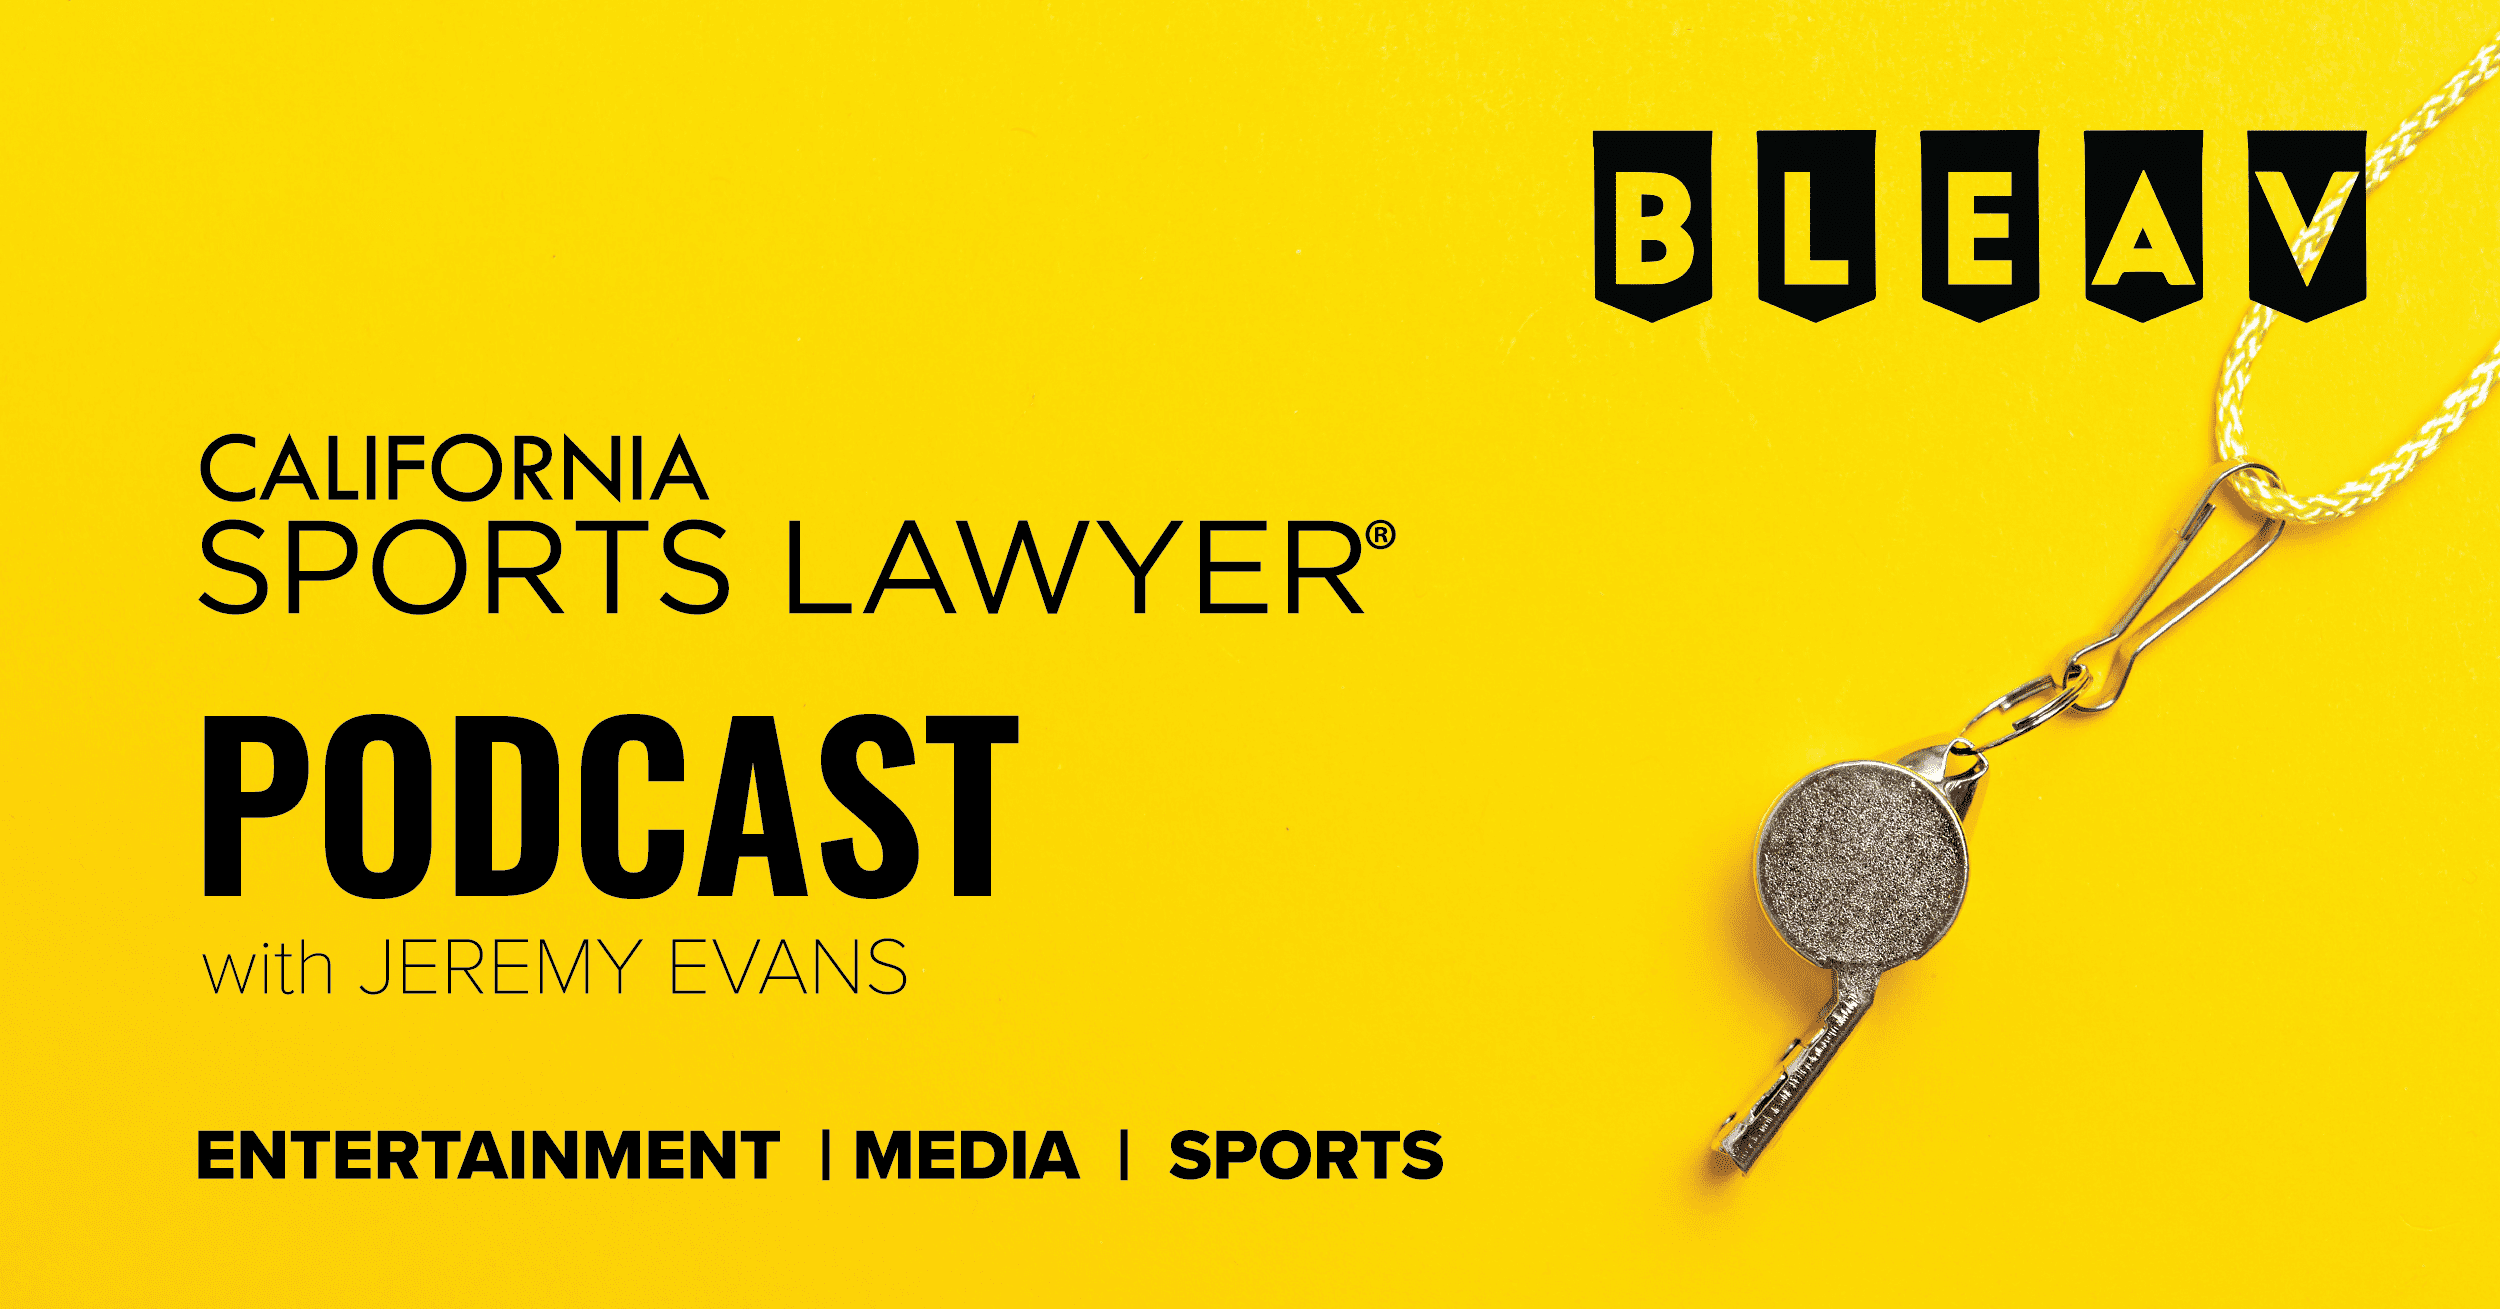 California Sports Lawyer® Podcast with Jeremy Evans: Three Ideas to Further Improve Baseball Attendance